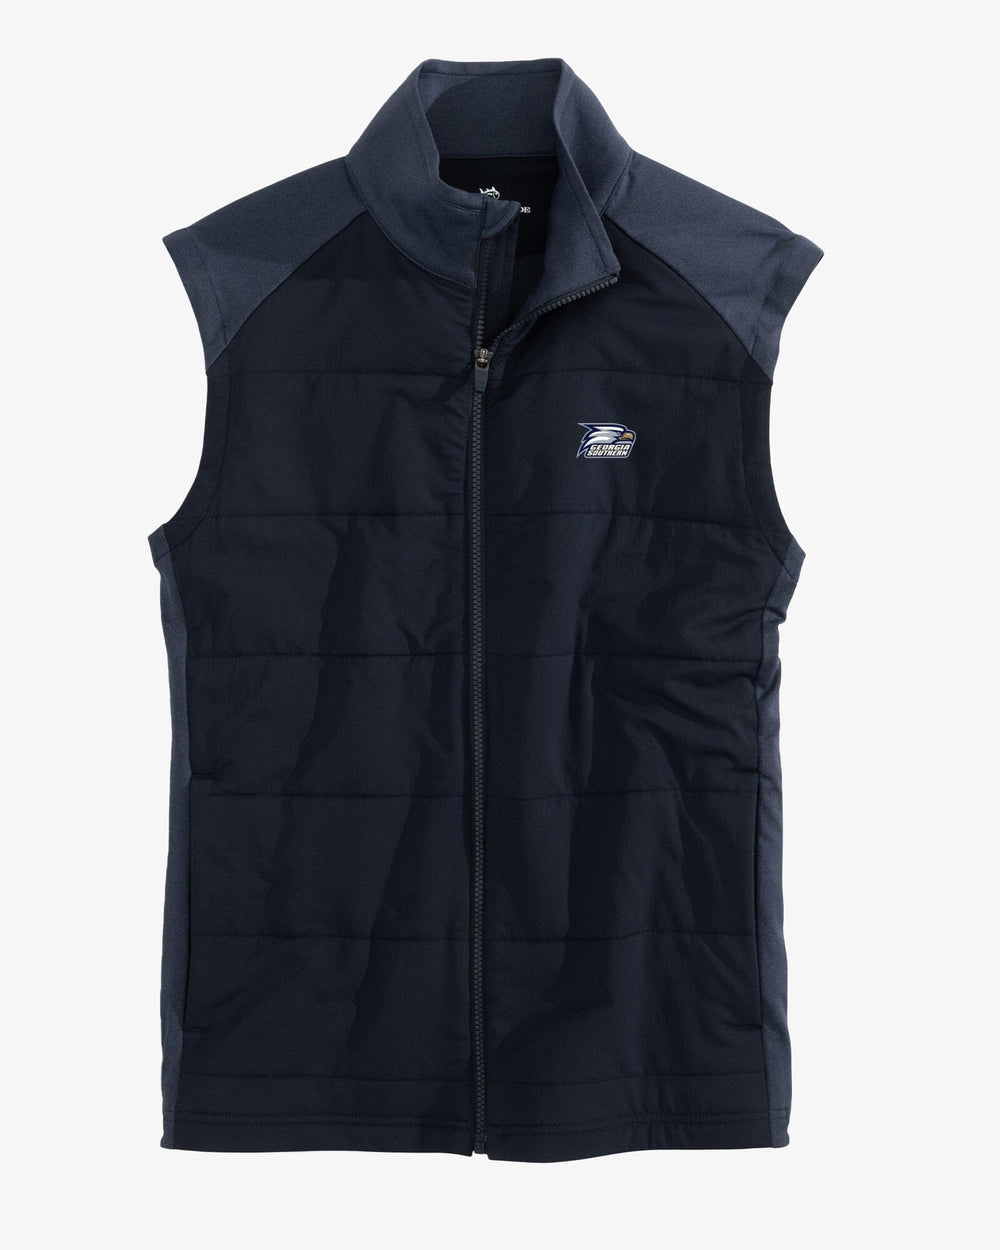 The front view of the Georgia Southern Eagles Performance Vest by Southern Tide - Heather Navy